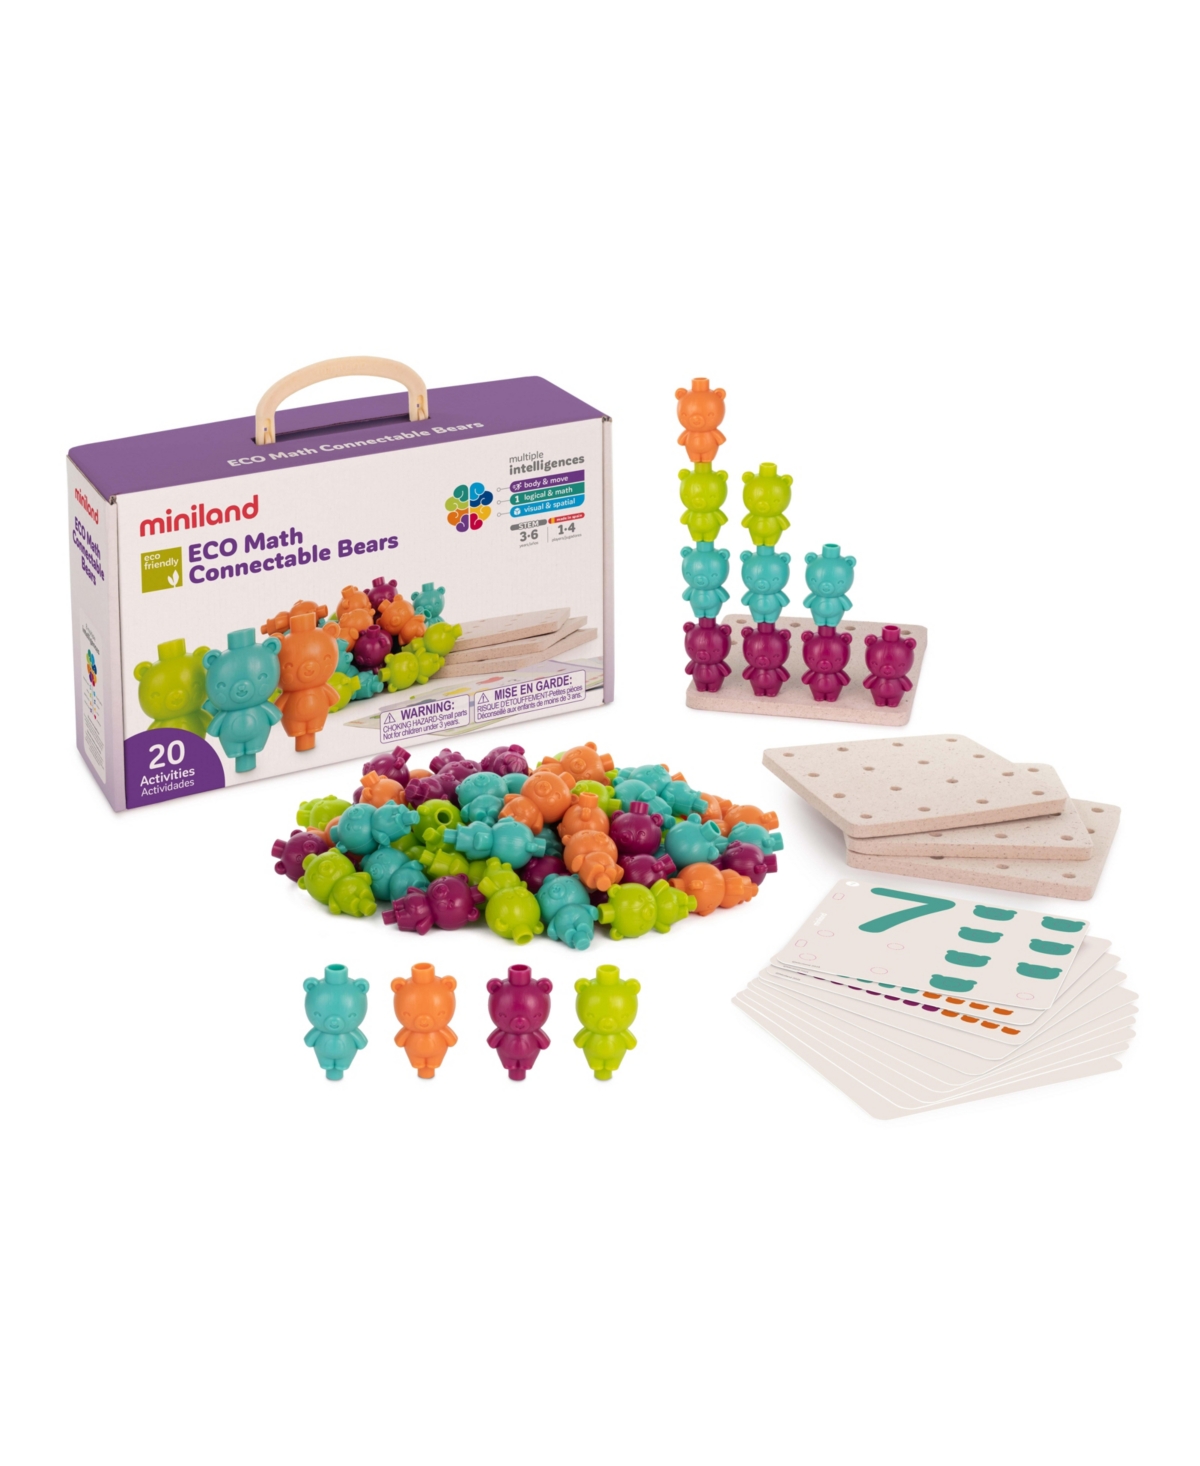 Miniland Kids' Eco Math Connectable Bears In Multicolor